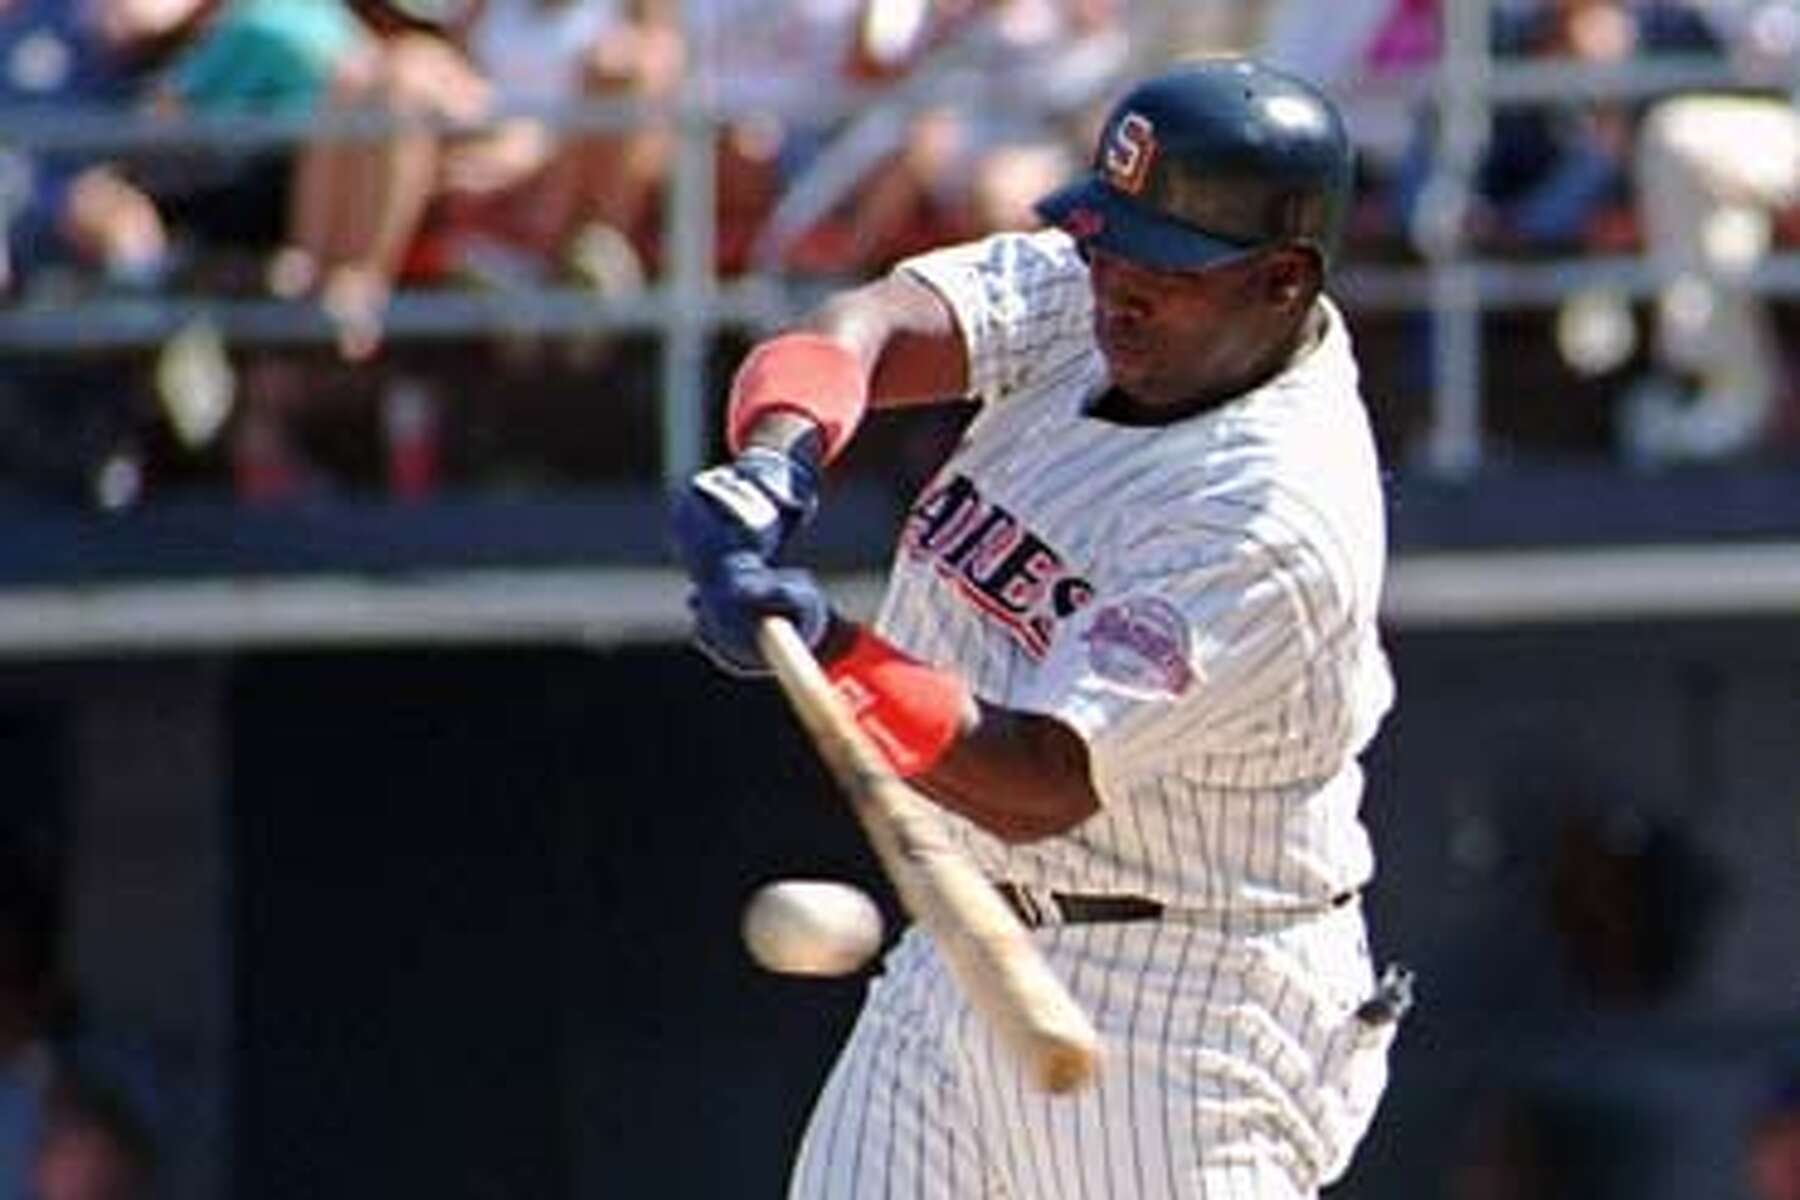 Tony Gwynn giving great advice to keeping the pat in the zone and on p